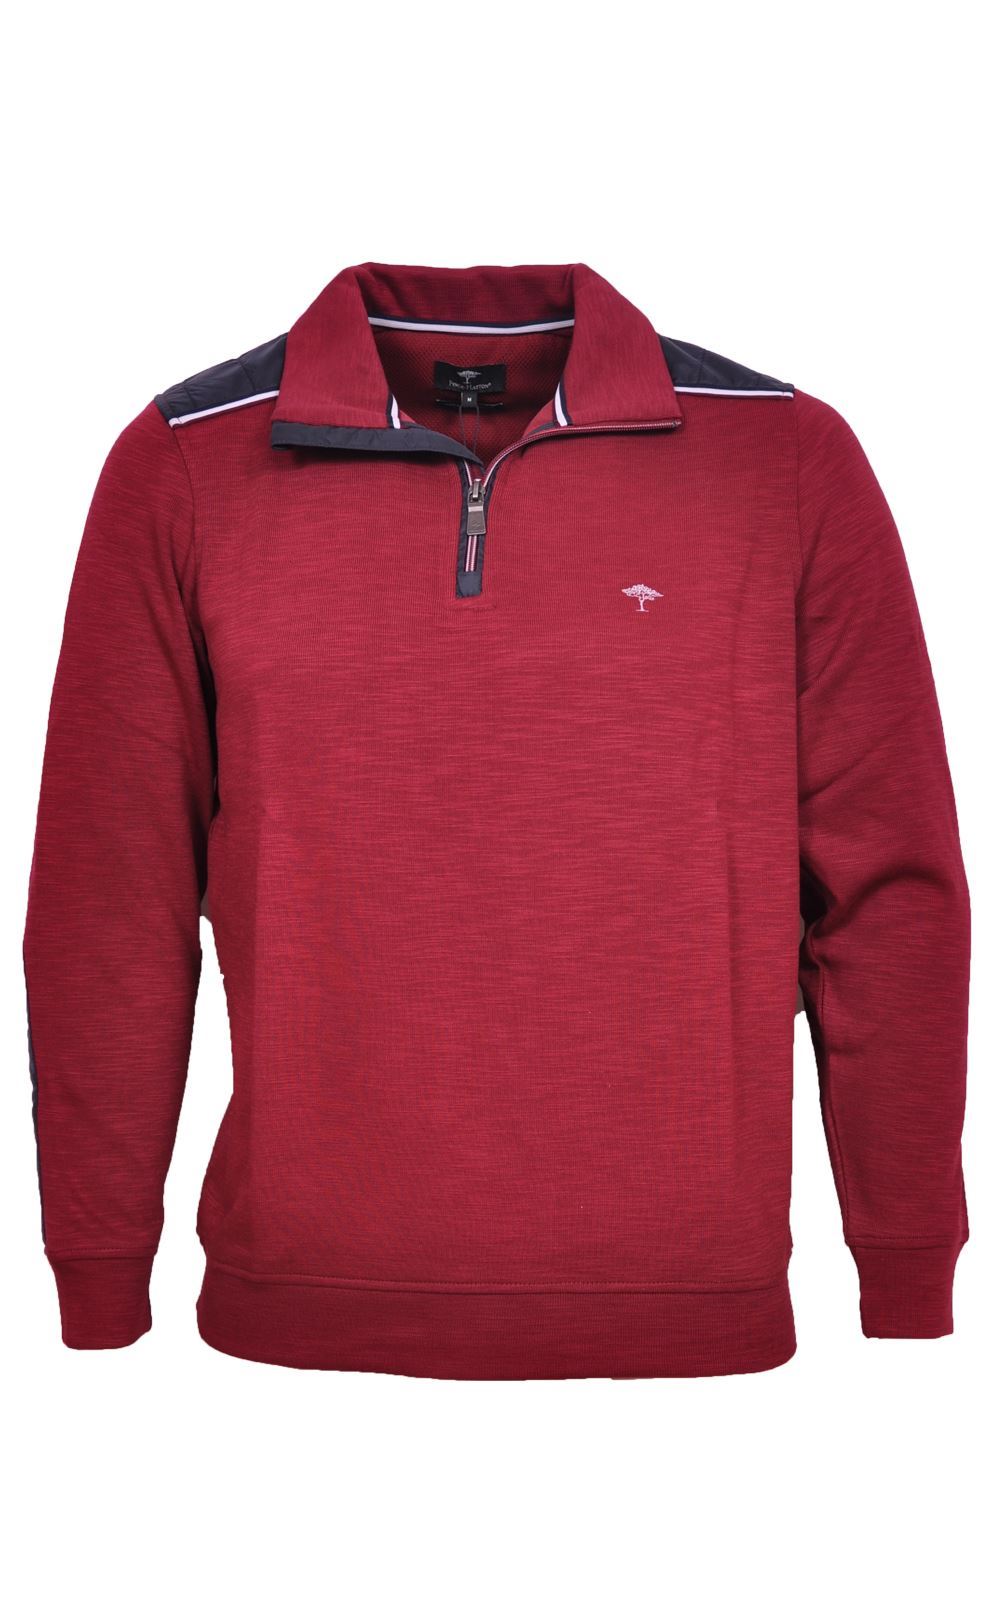 Picture of Fynch Hatton 1/4 Zip Pullover 1220-3000